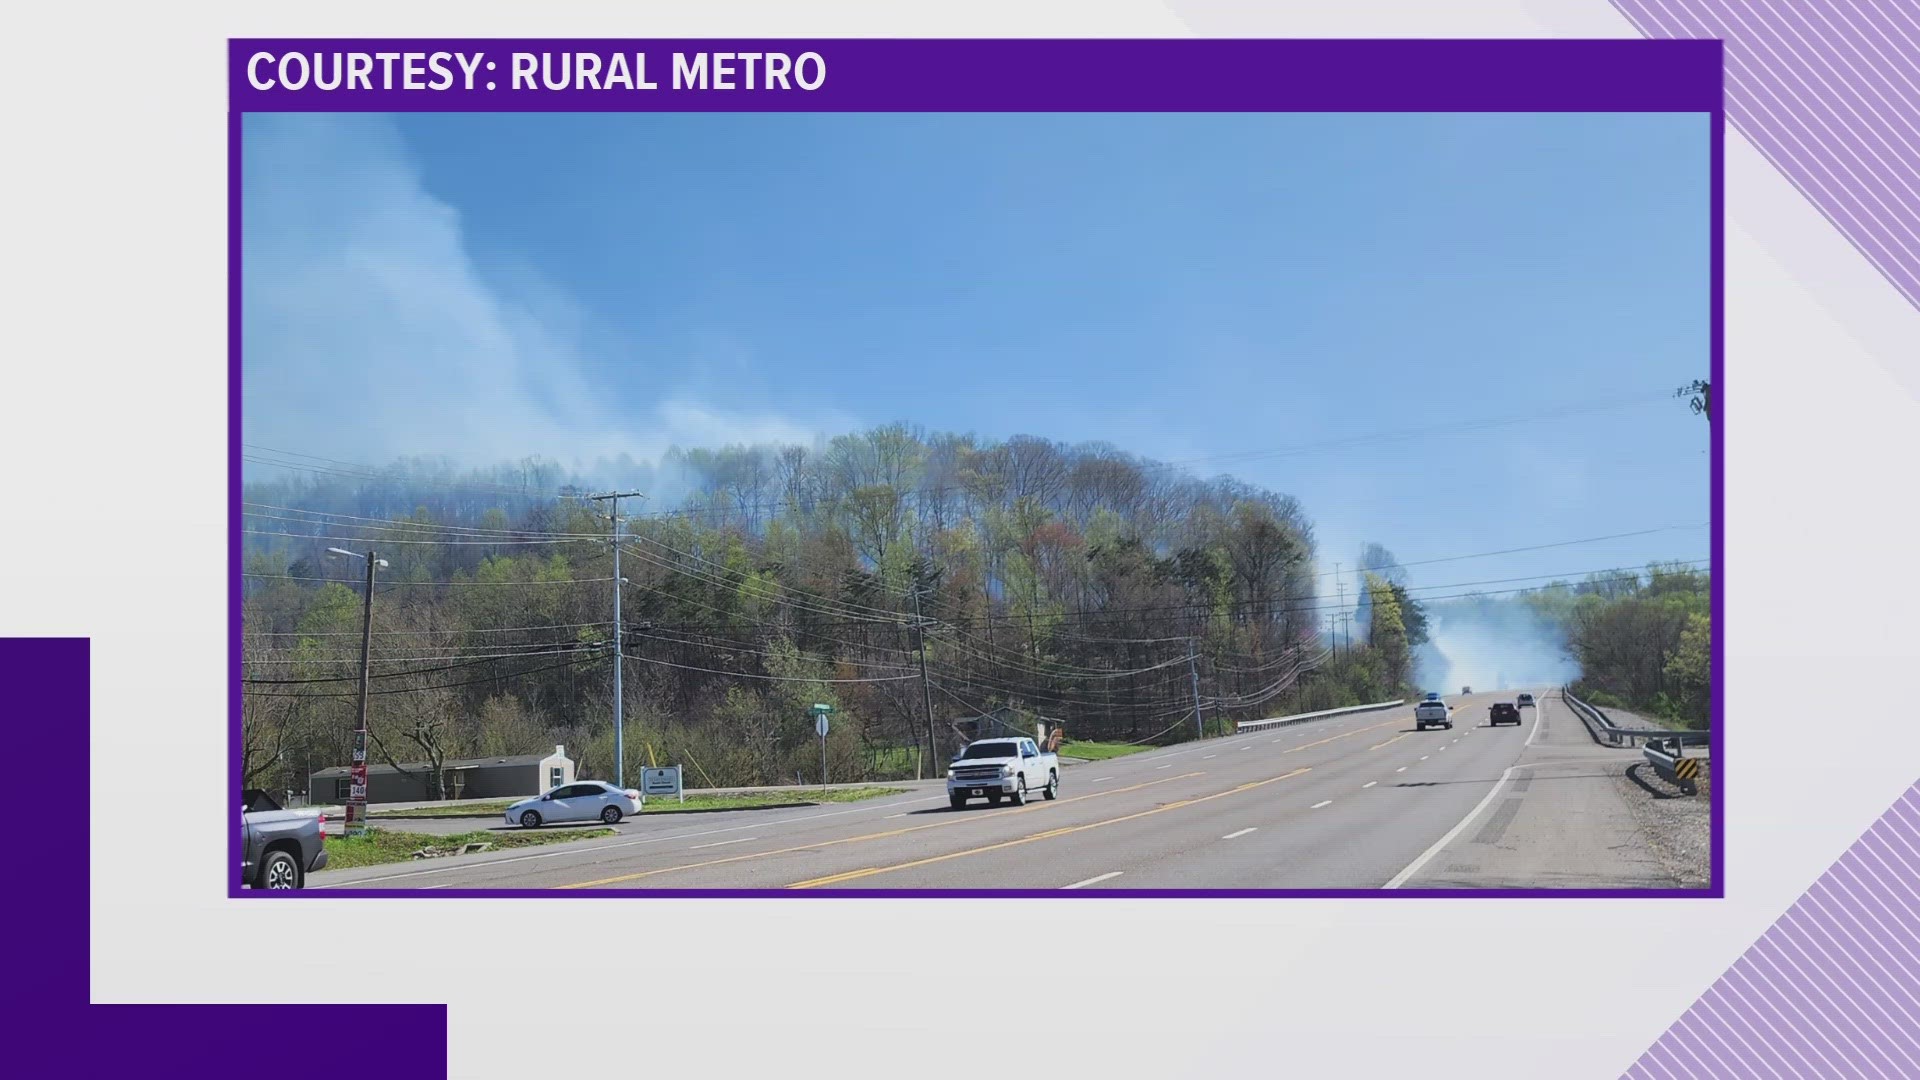 Rural Metro is saying they are battling multiple brush fires with high winds blowing trees downs onto power lines and sparking fires.